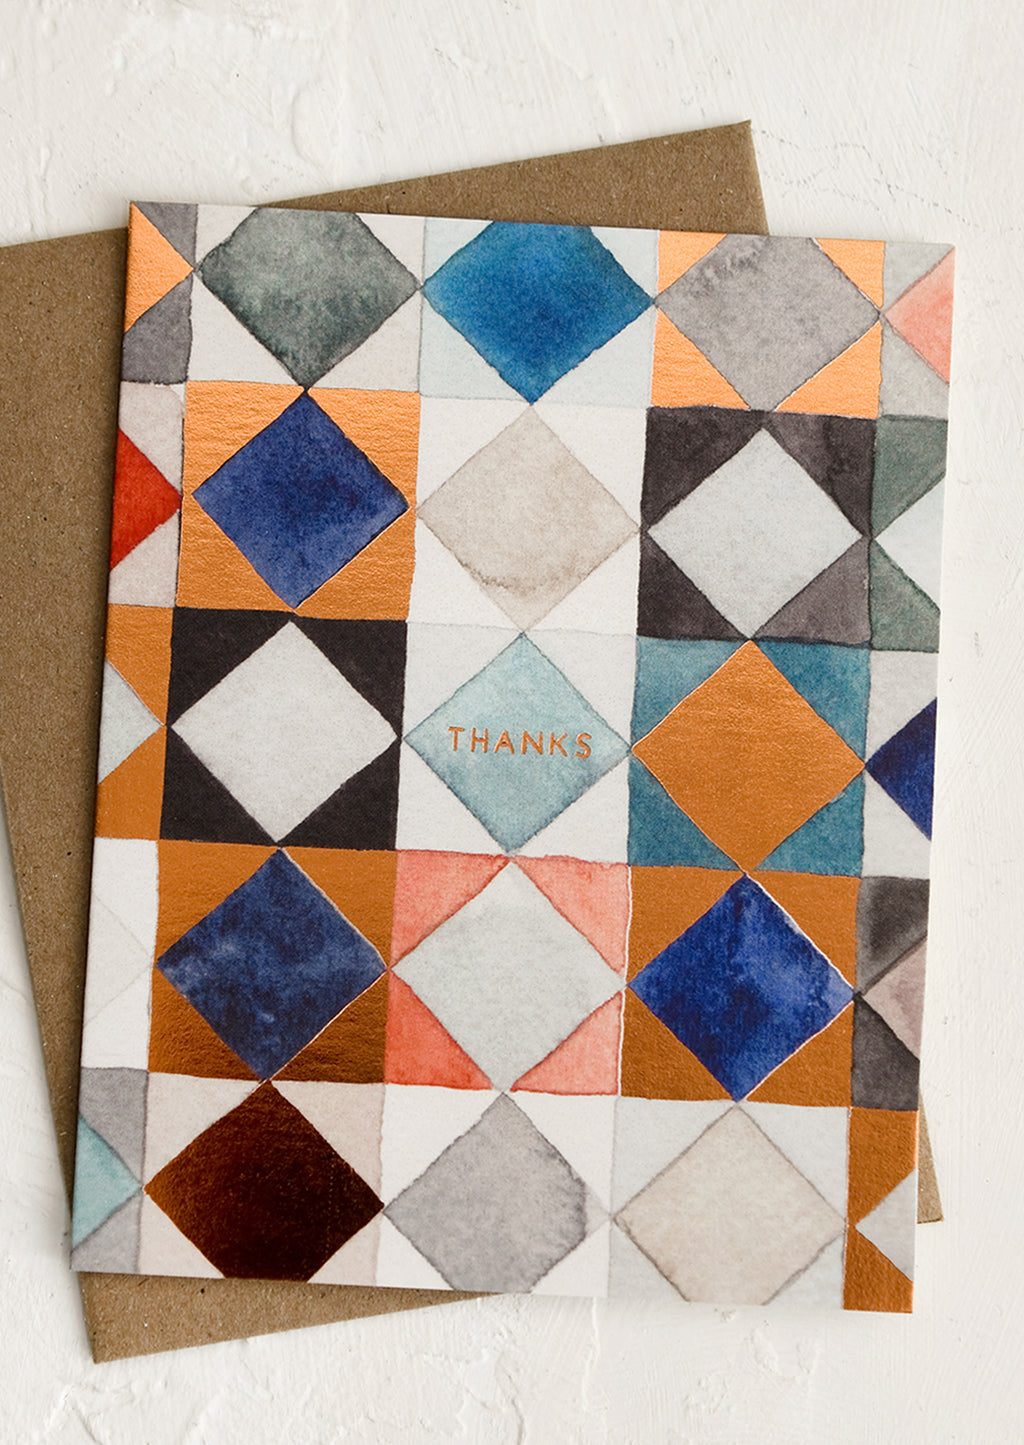 2: A set of blue and copper quilt print thank you cards.